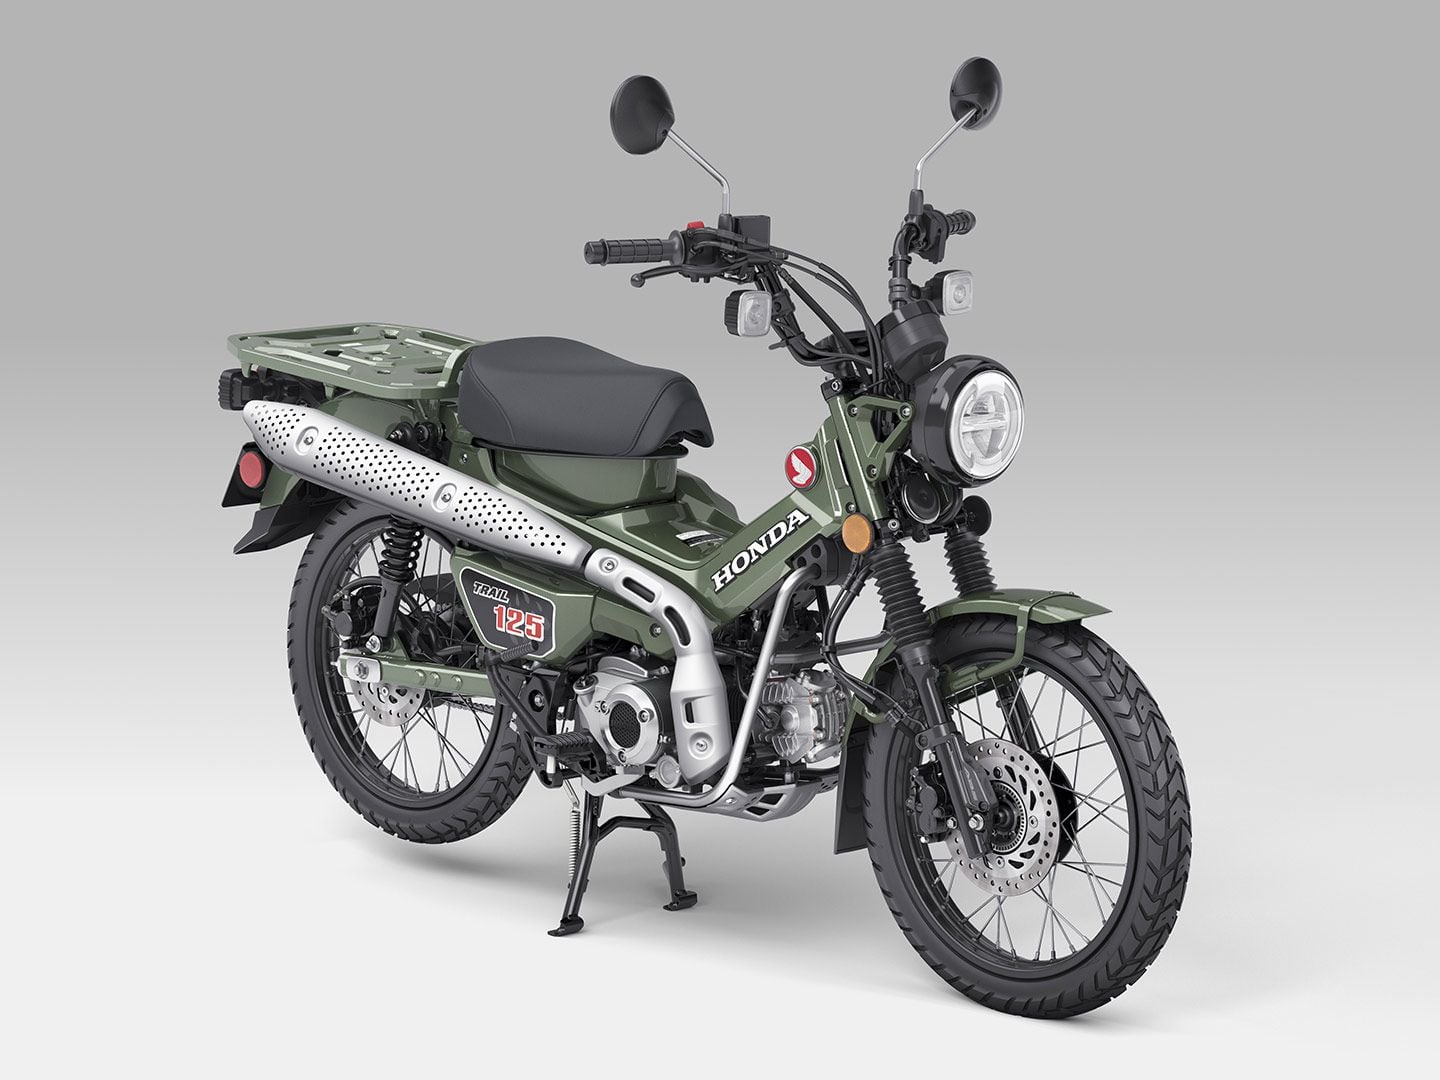 The Honda Trail 125 is a mountain goat of the minis. It can scale the trails with its 17-inch tires, 27mm telescopic fork, and twin shocks.